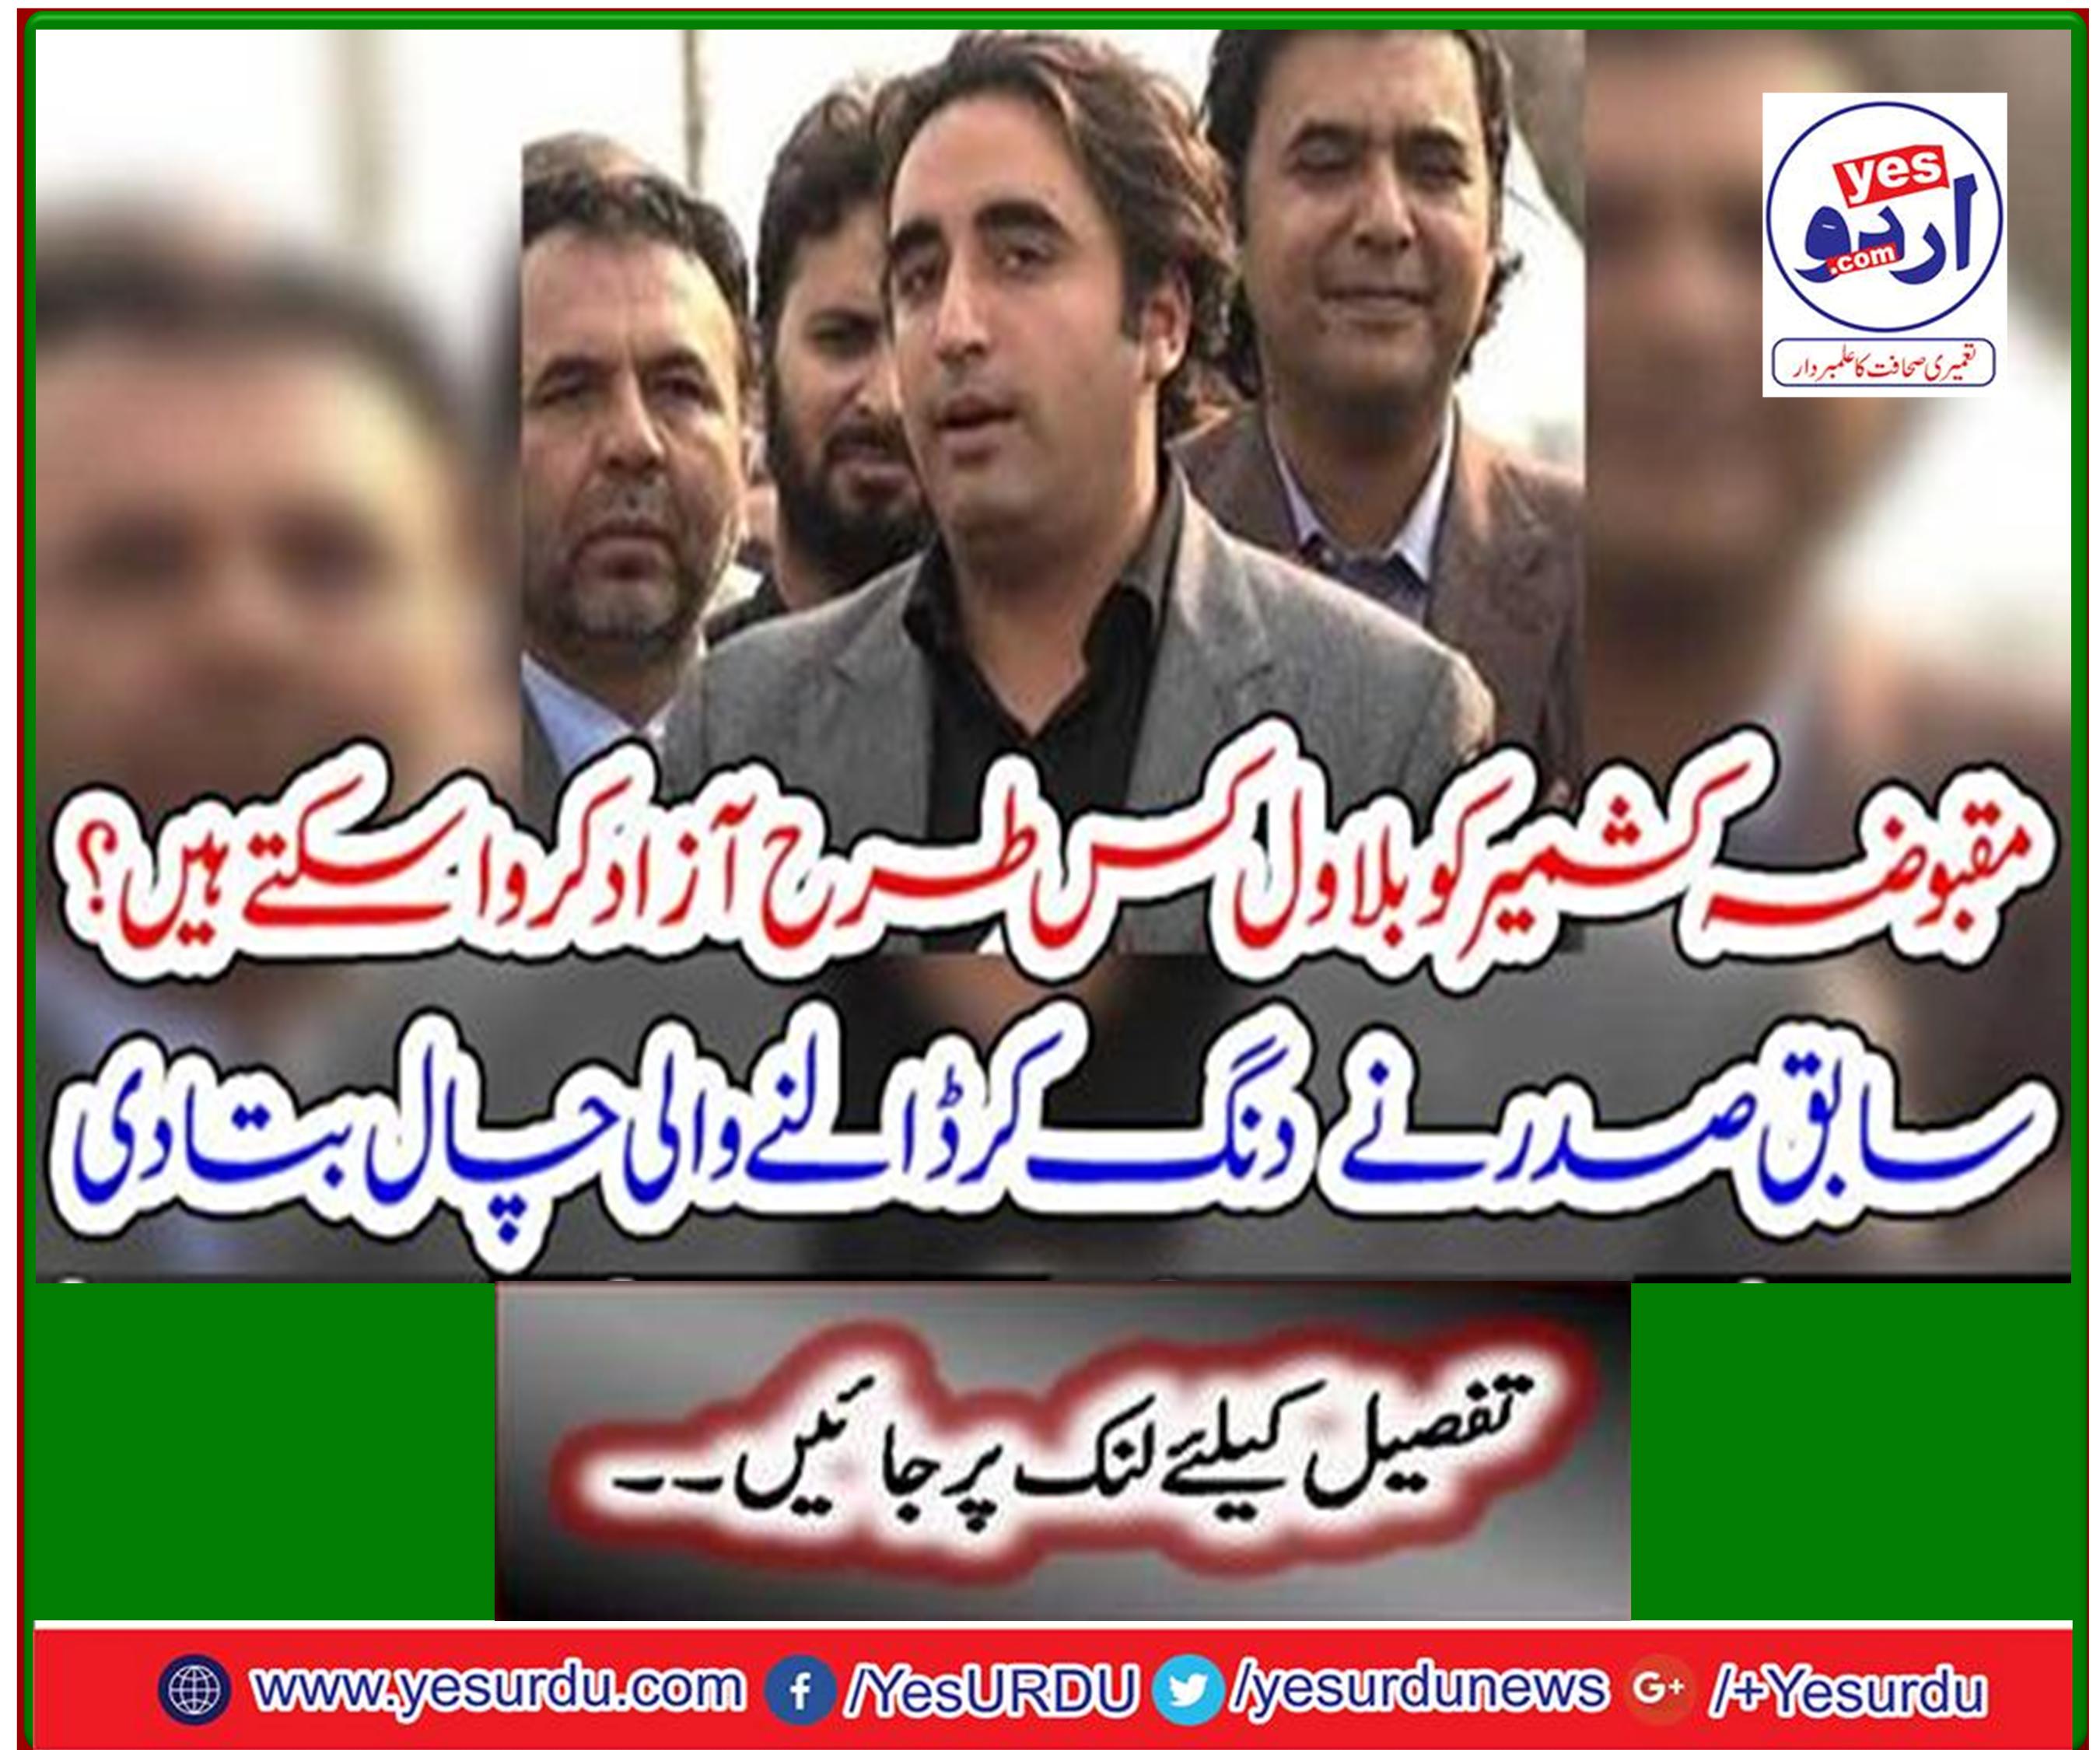 How can Bilawal liberate occupied Kashmir? The former president described the staggering tactic